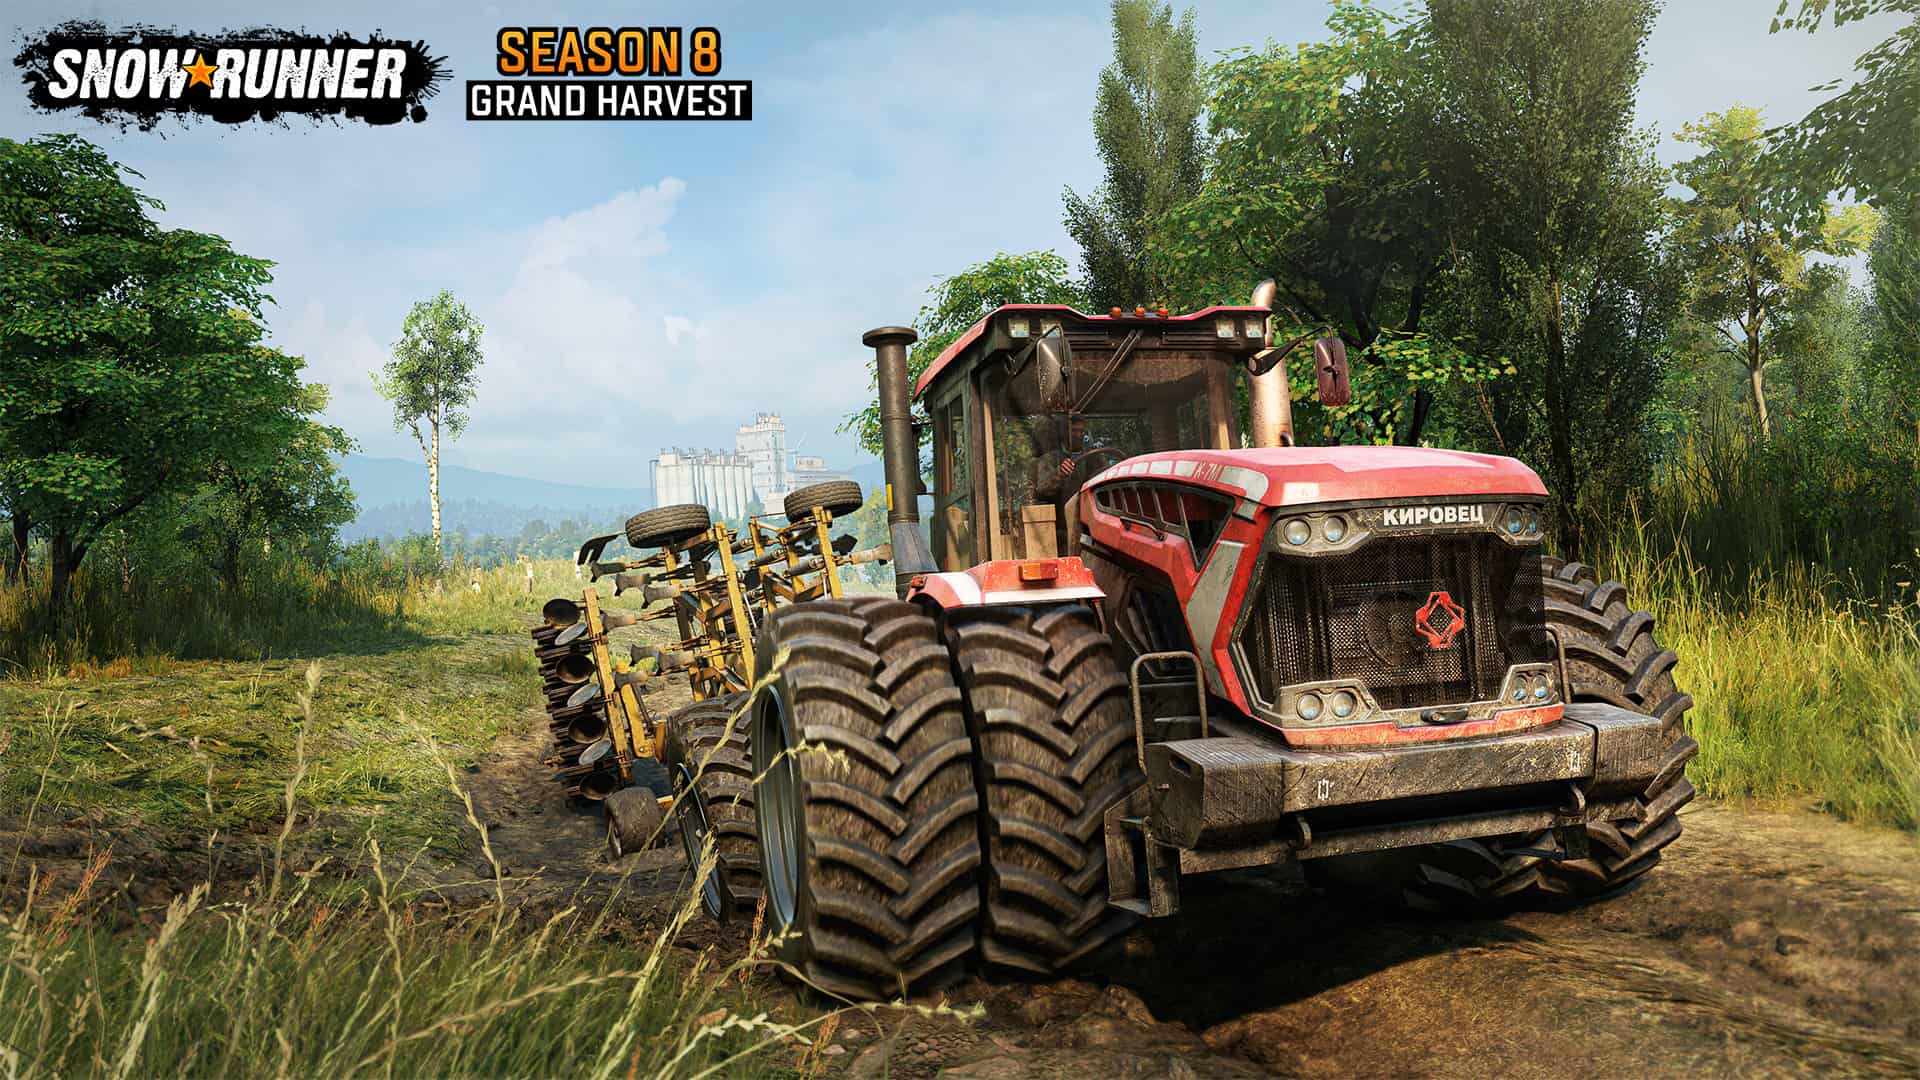 SnowRunner Year 2 ends with Season 8 - Grand Harvest Expansion available now